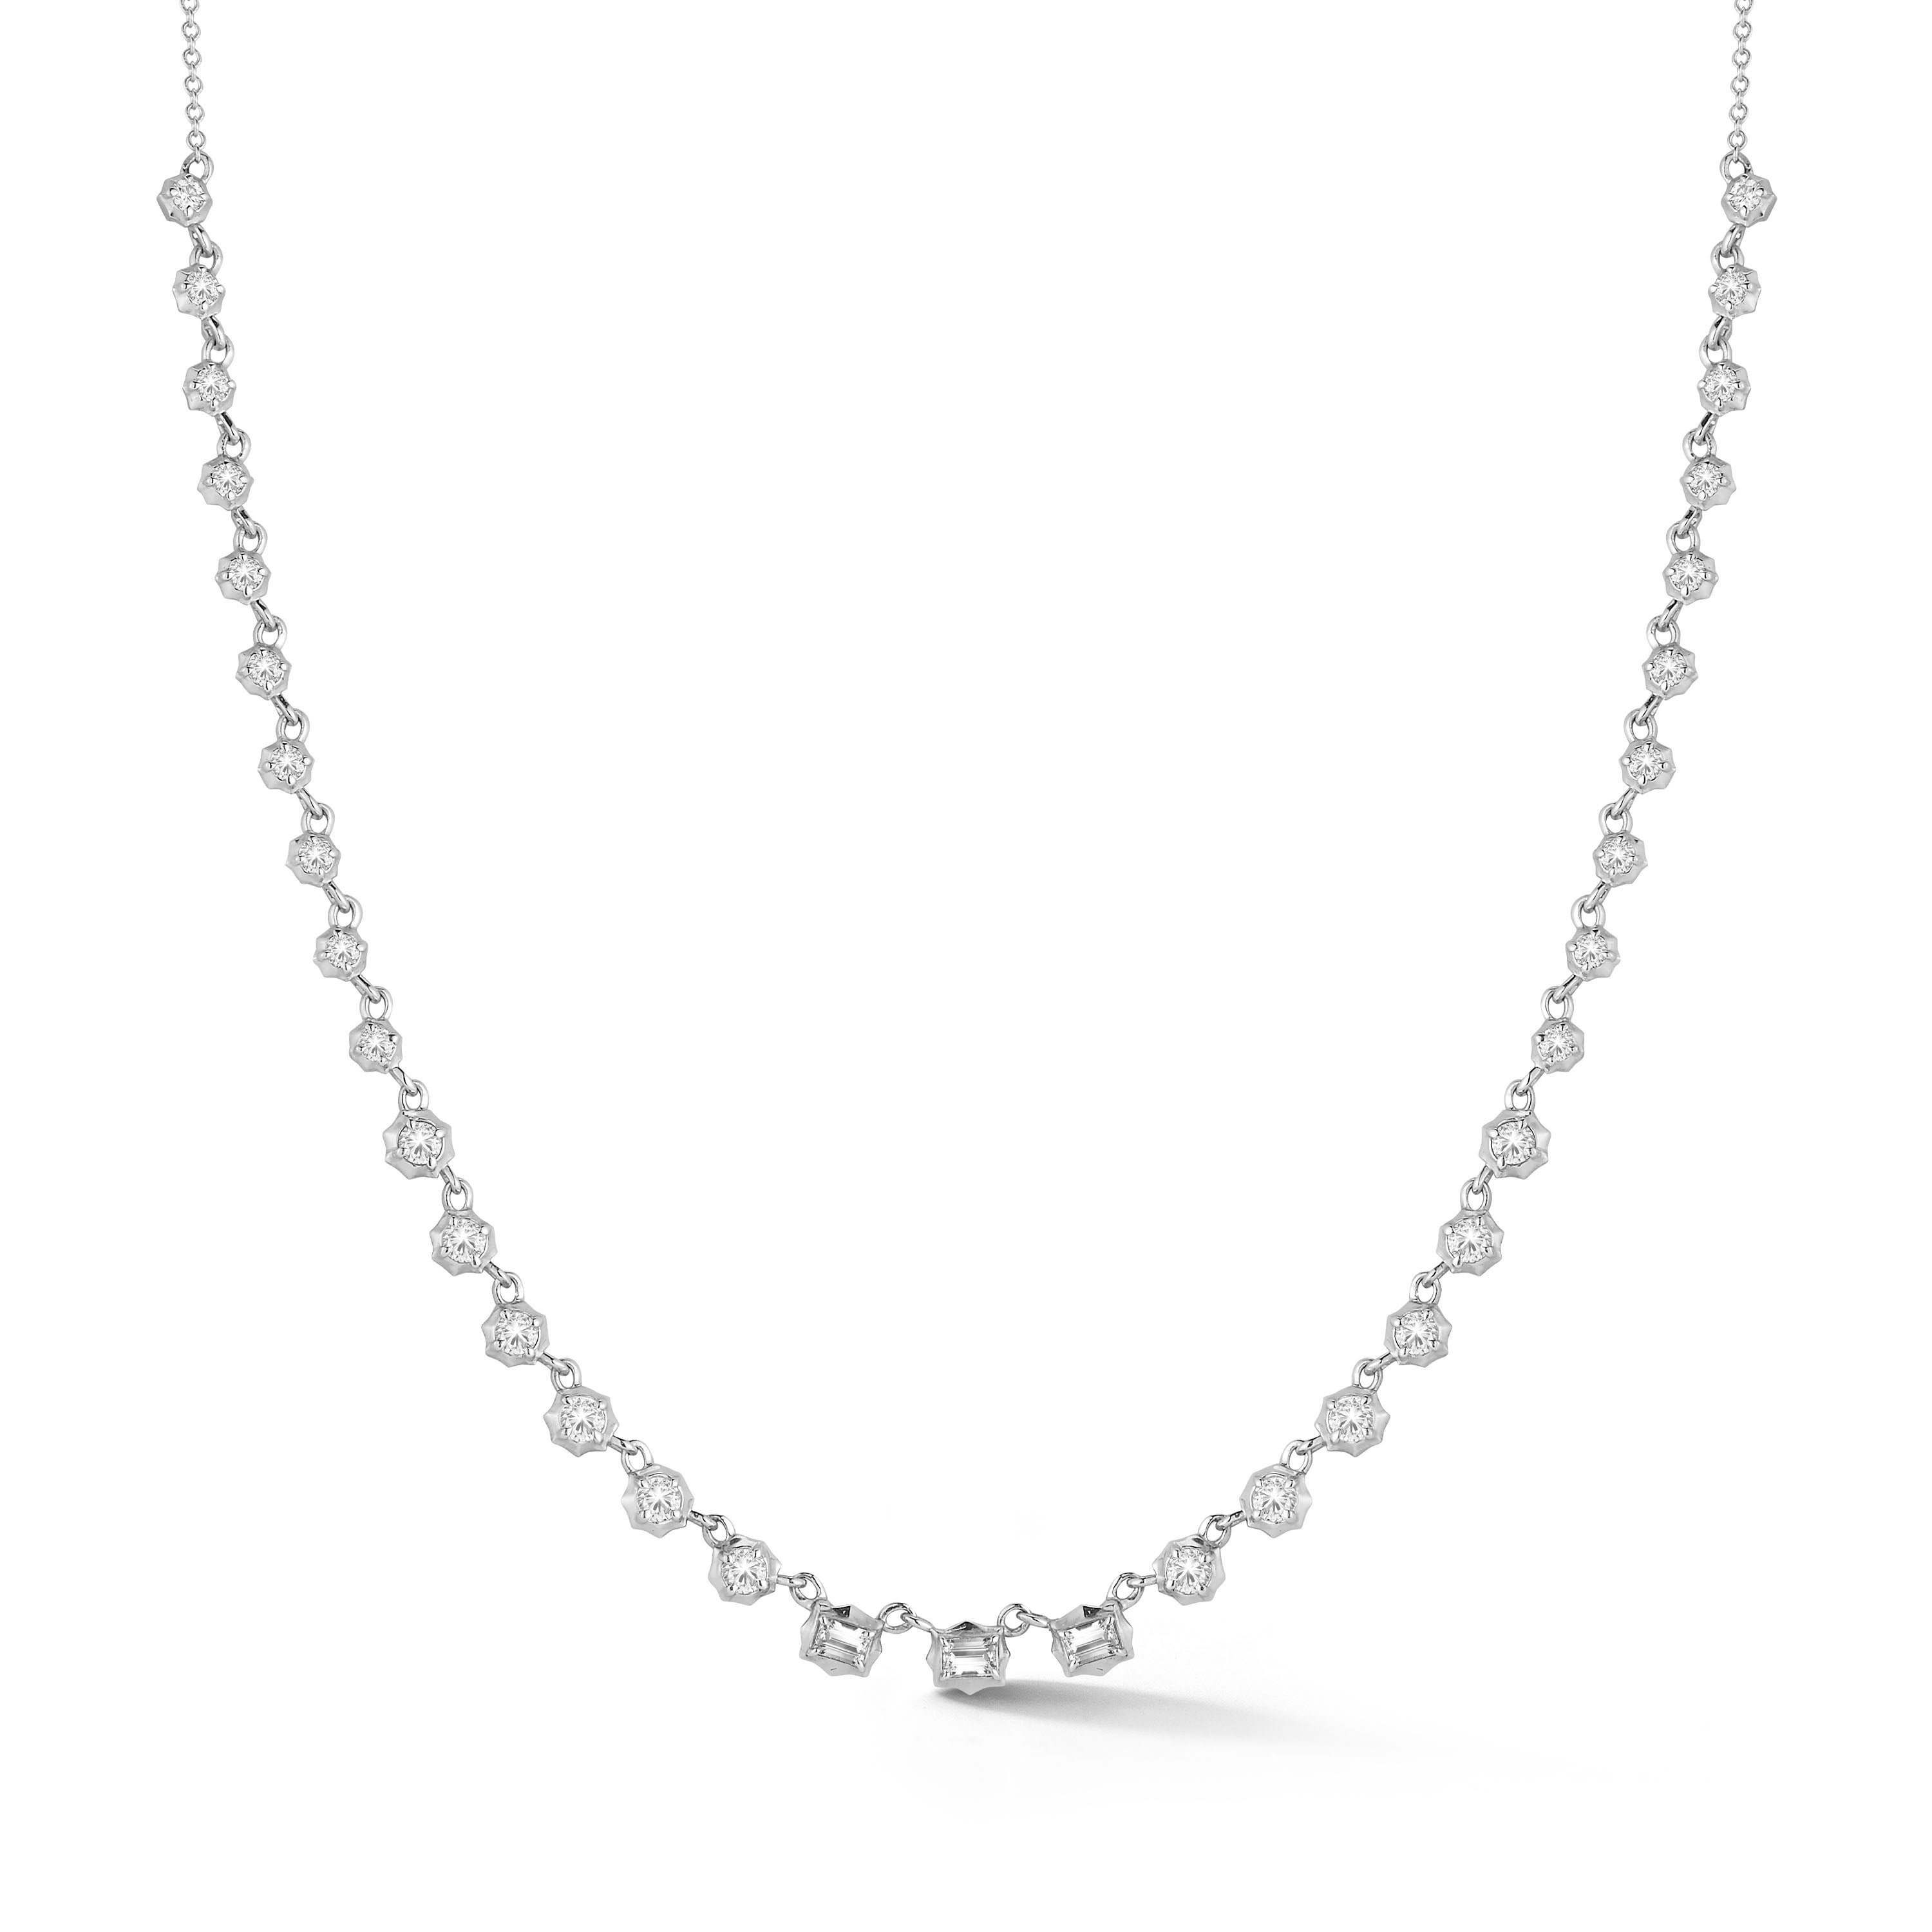 Small Vanguard Riviera Necklace in 18K White Gold